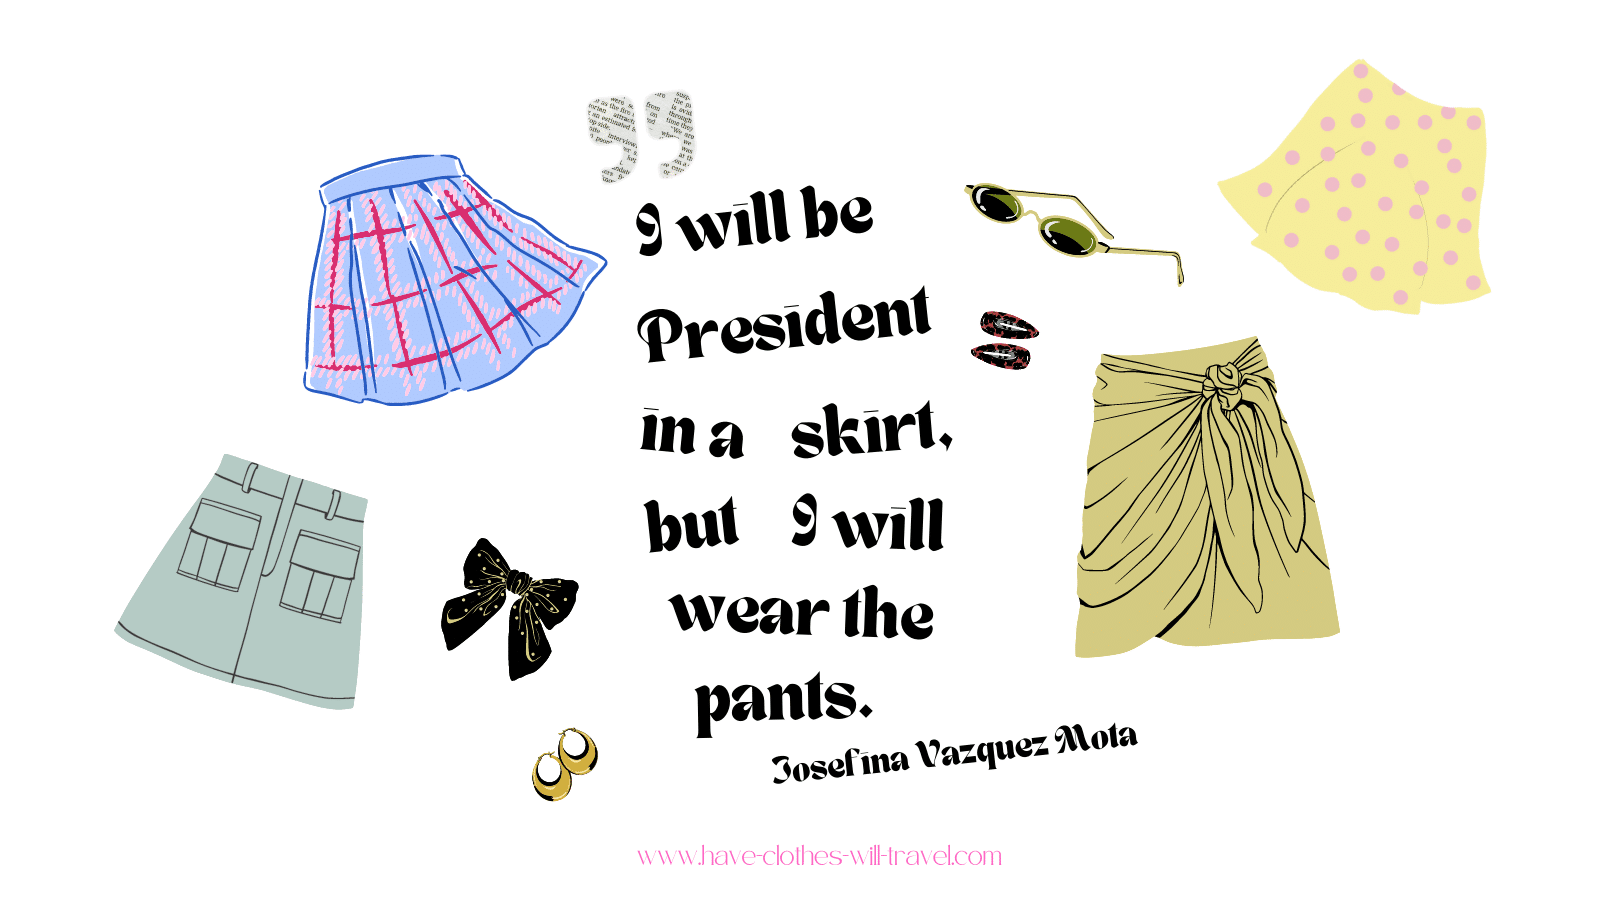 93.I will be a president in a skirt, but I will wear the pants. - Josefina Vazquez Mota